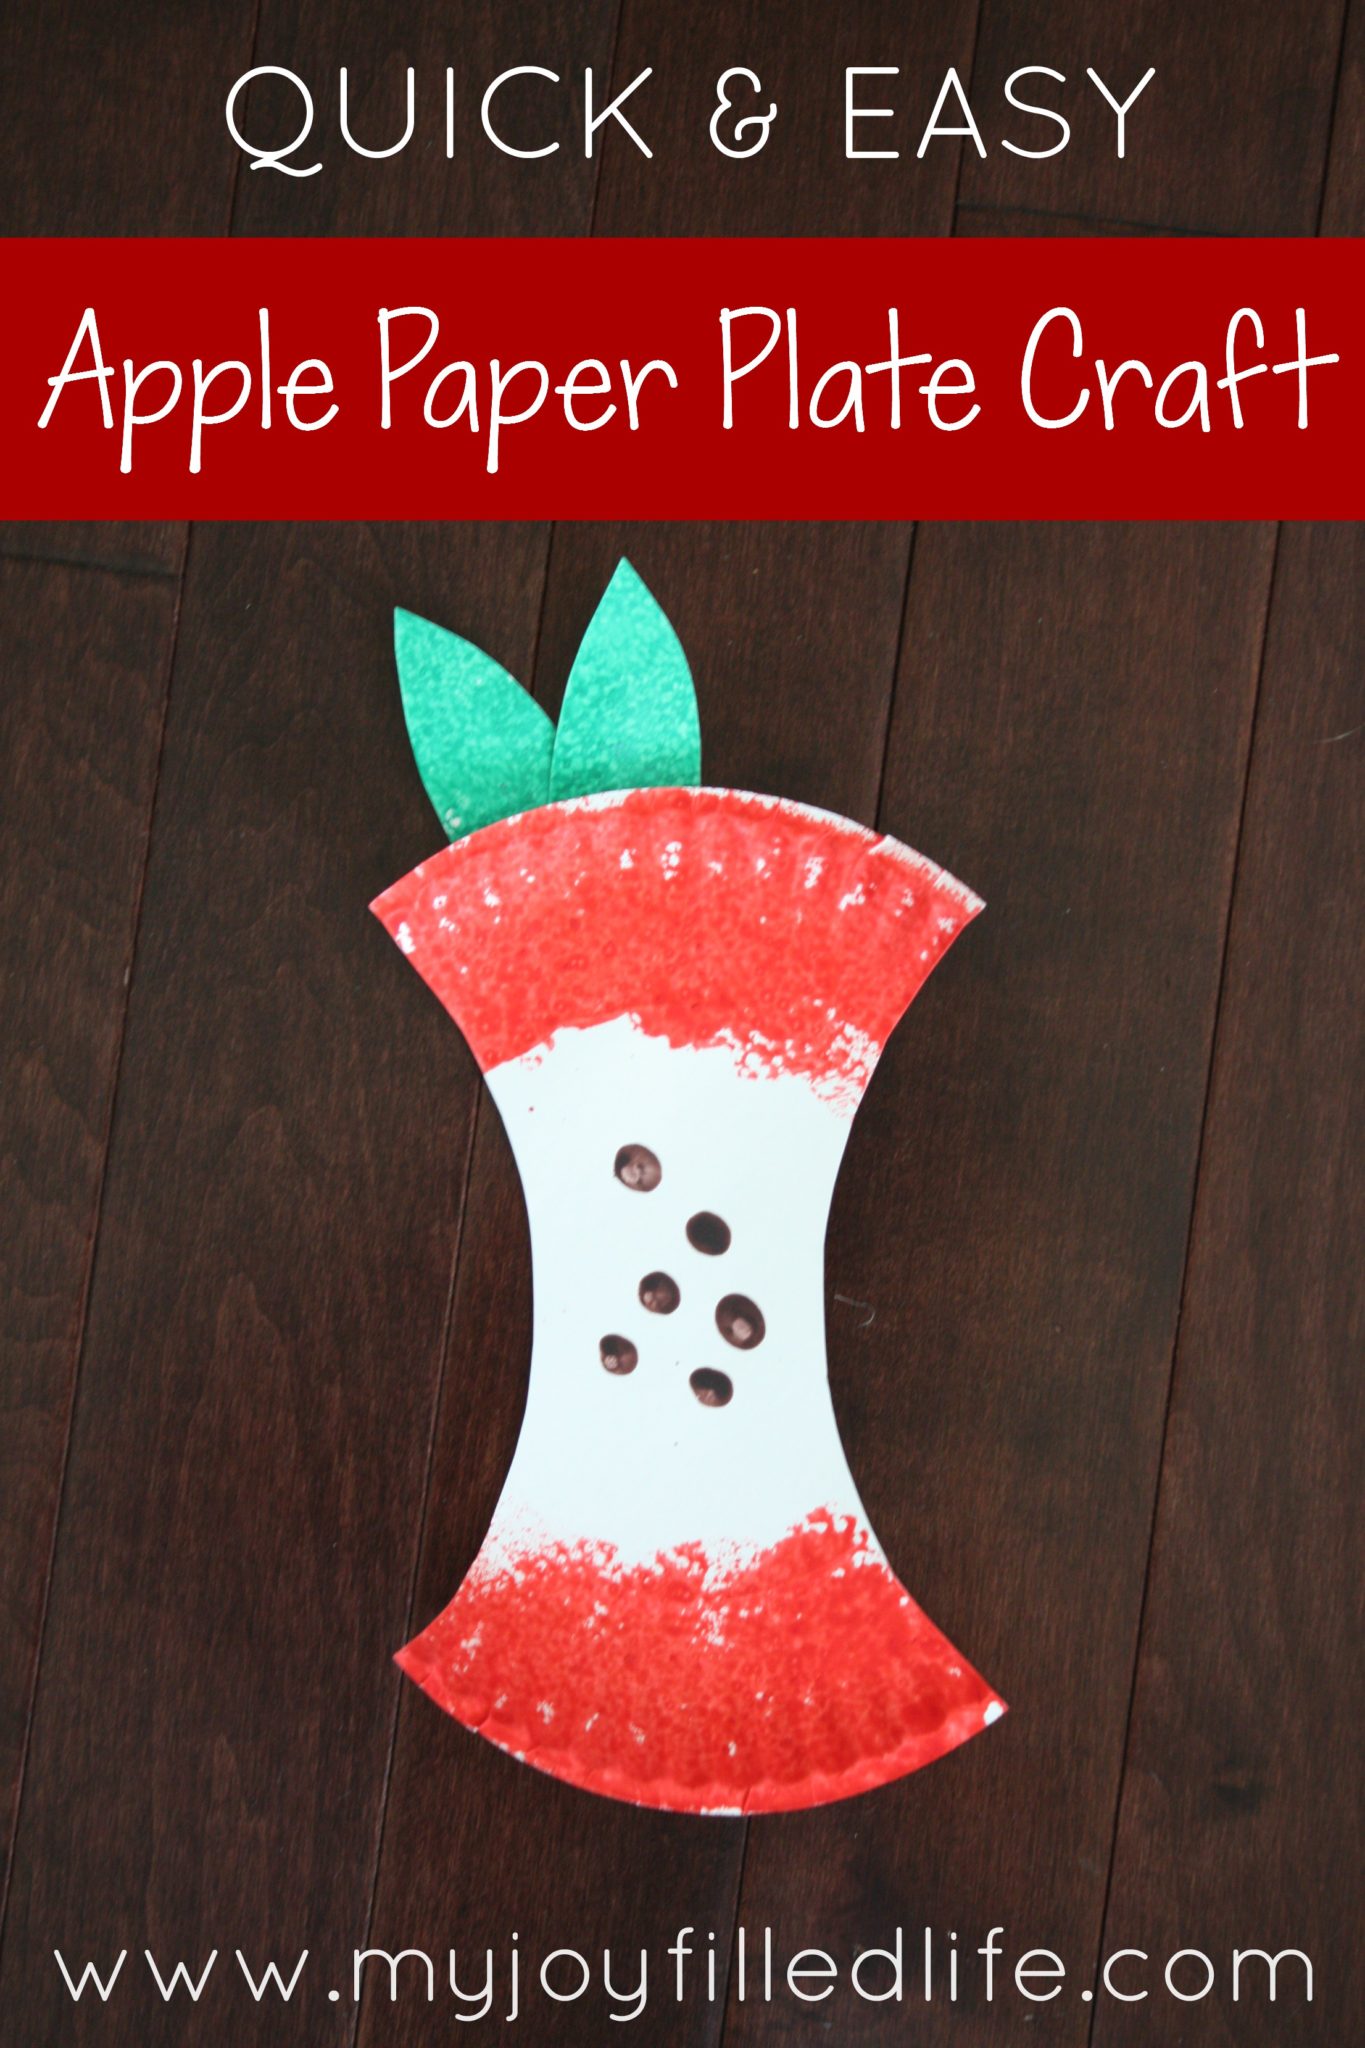 Quick & Easy Apple Paper Plate Craft - My Joy-Filled Life